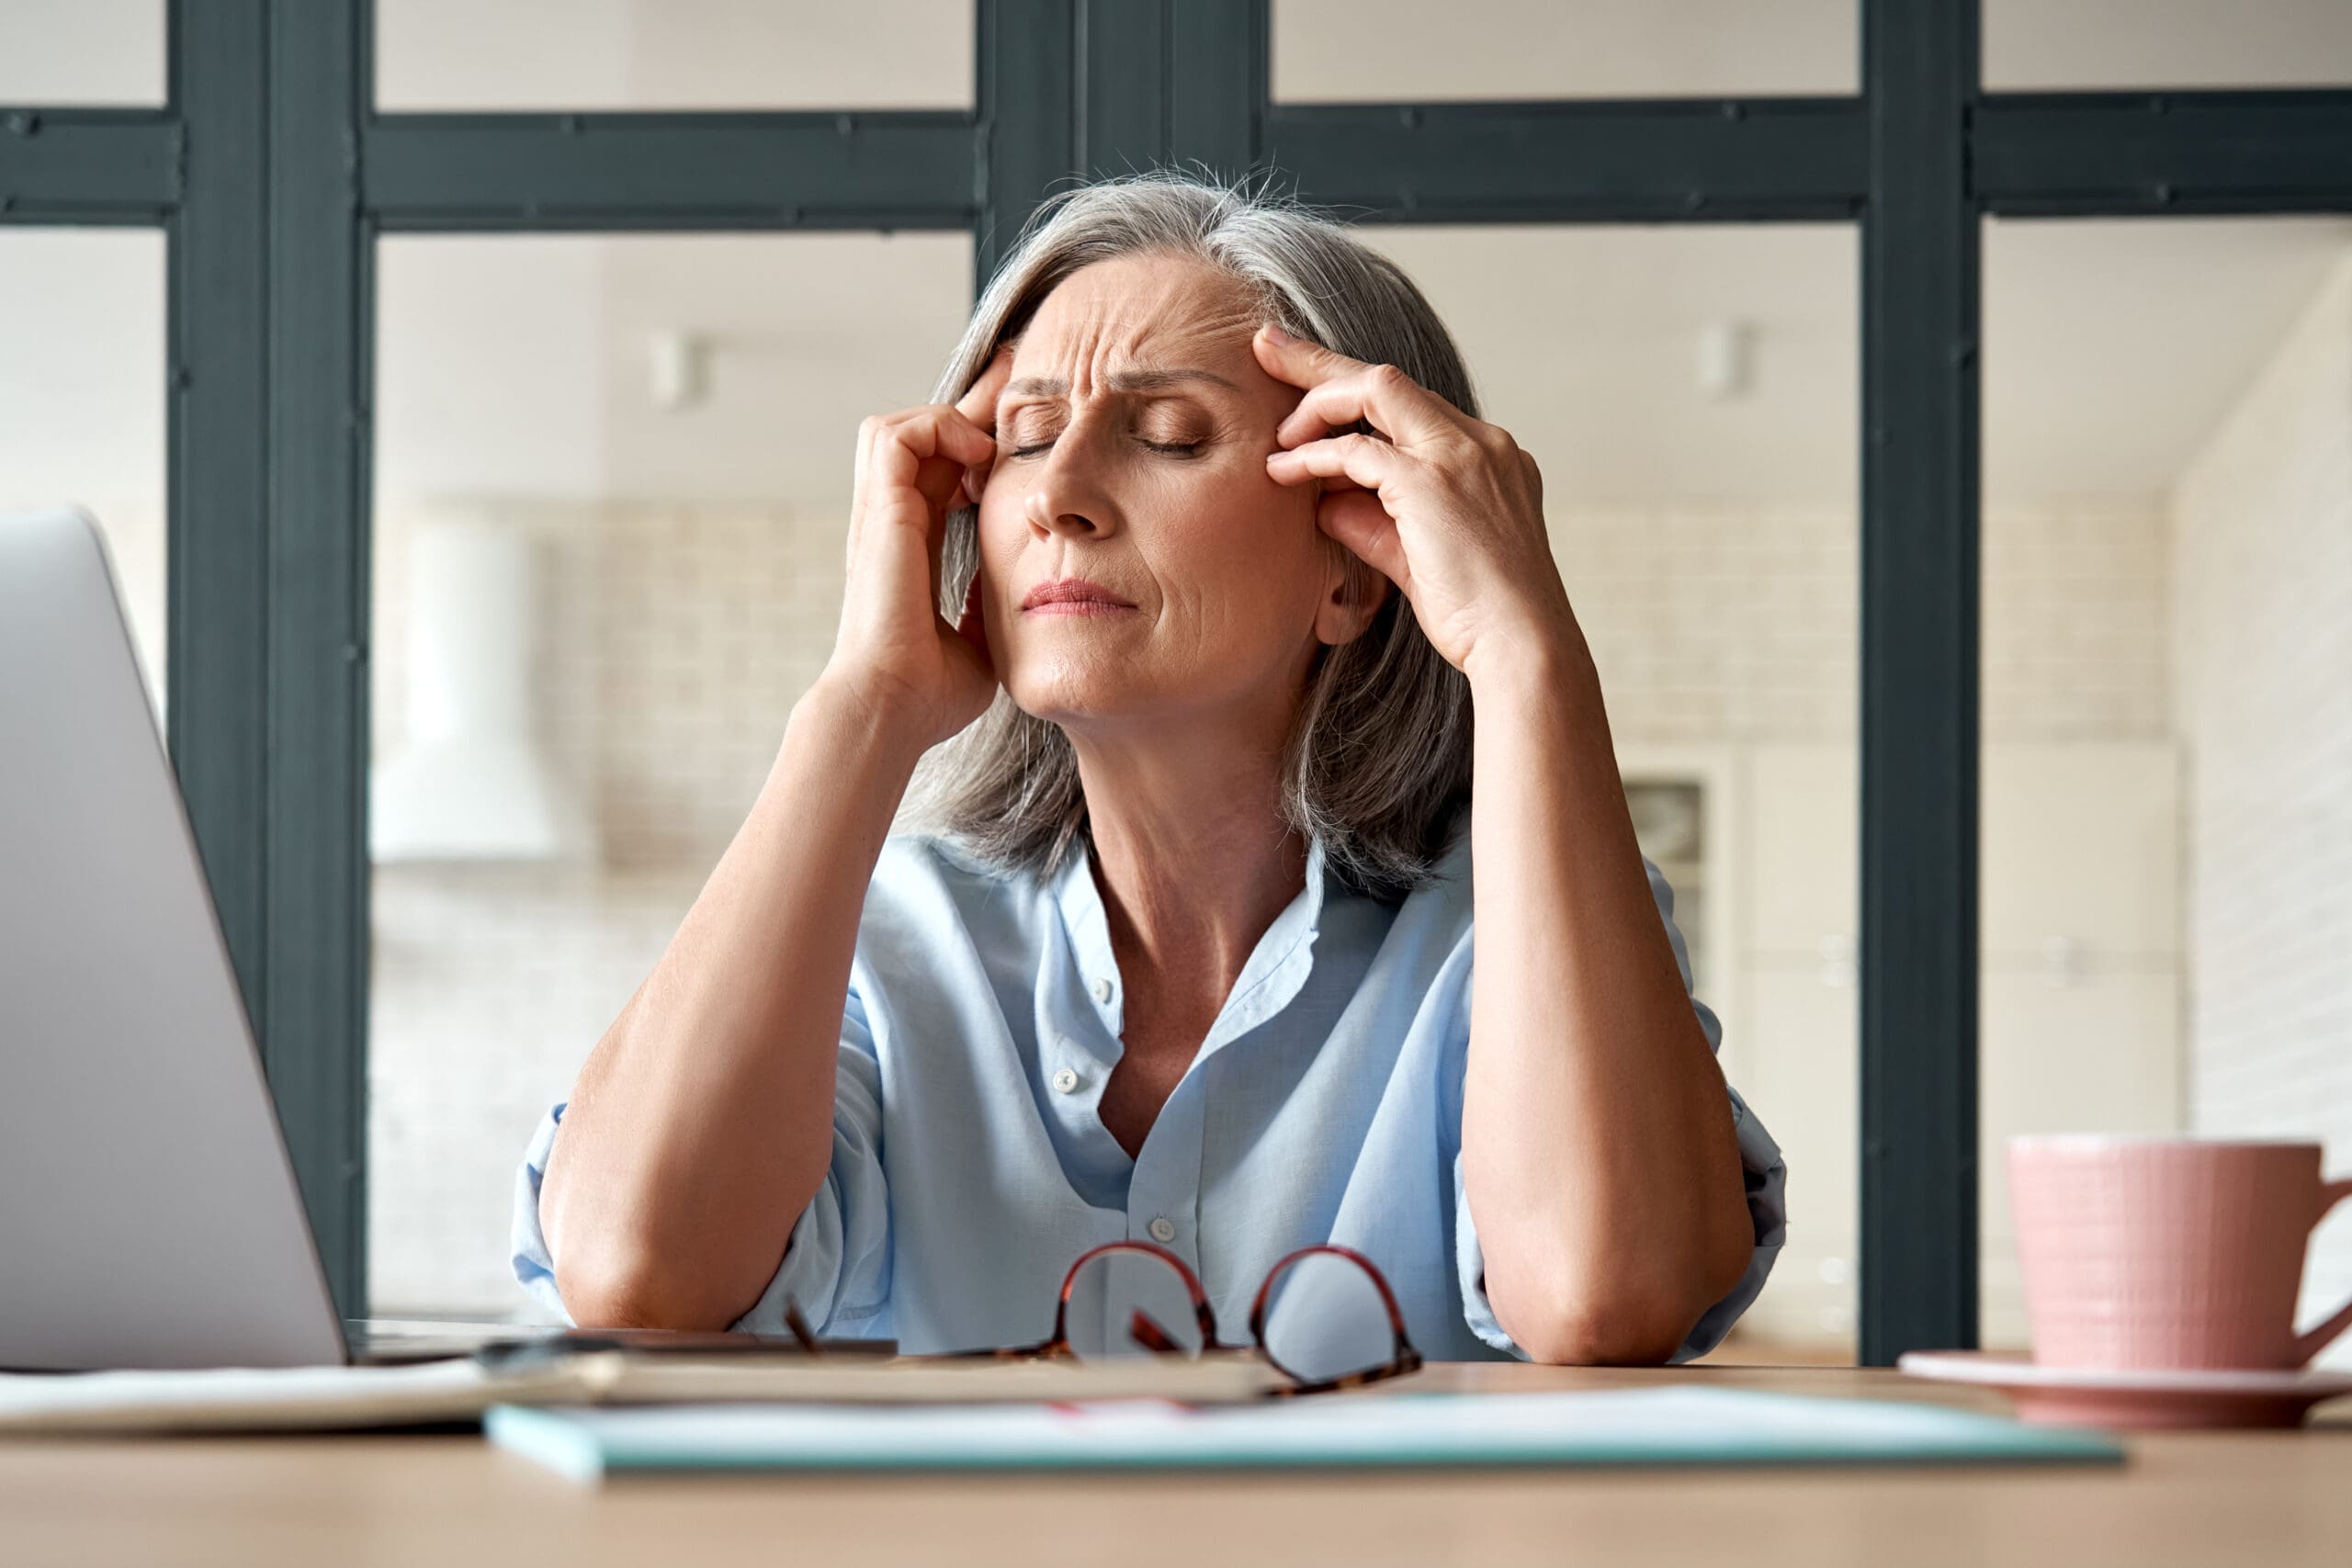 Does the risk of dementia in women have anything to do with menopause?